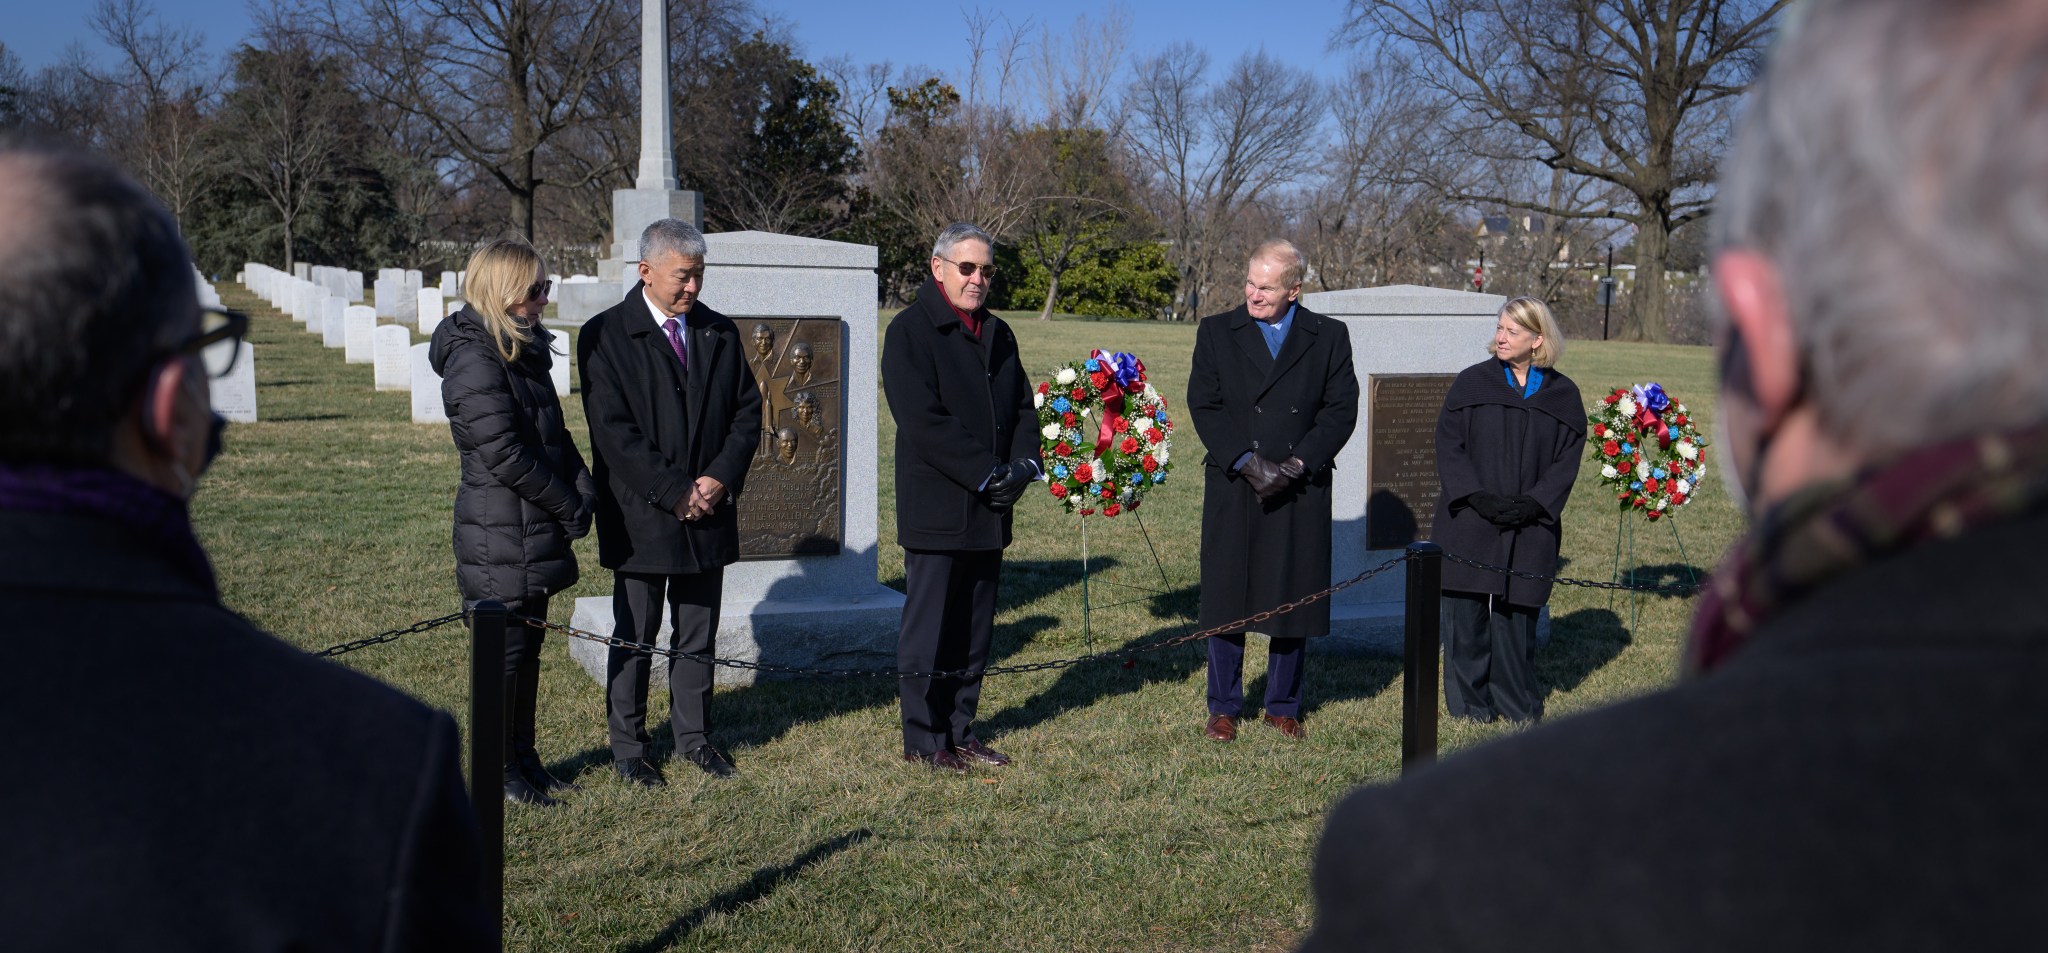 Wreaths were laid in memory of those men and women who lost their lives in the quest for space exploration.